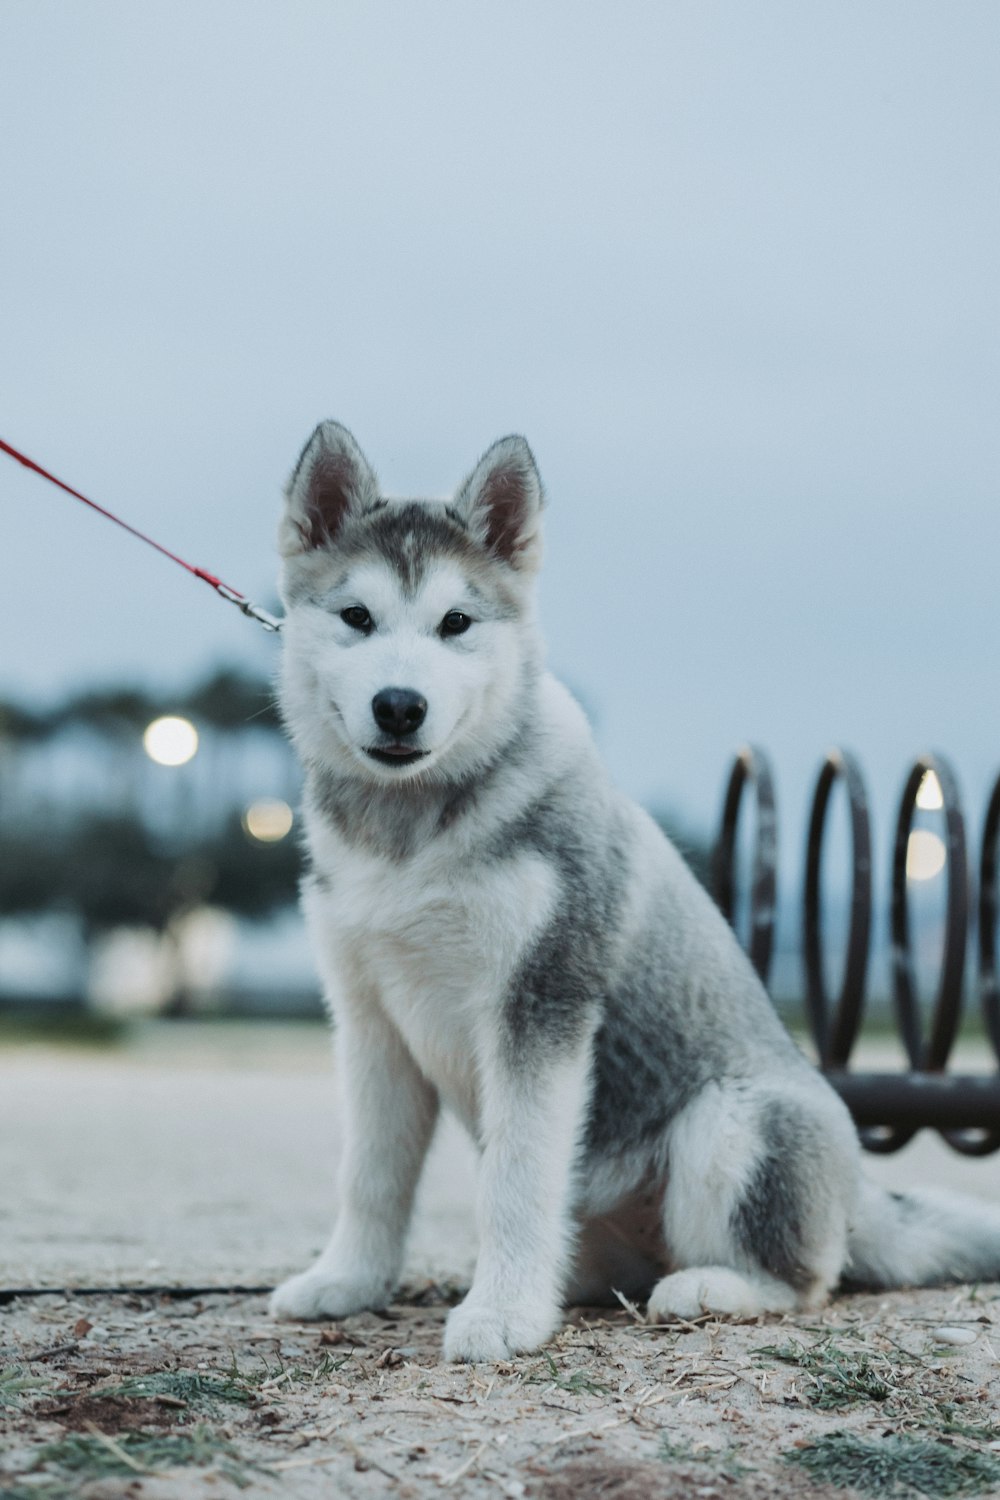 a husky dog sitting on the ground with a leash